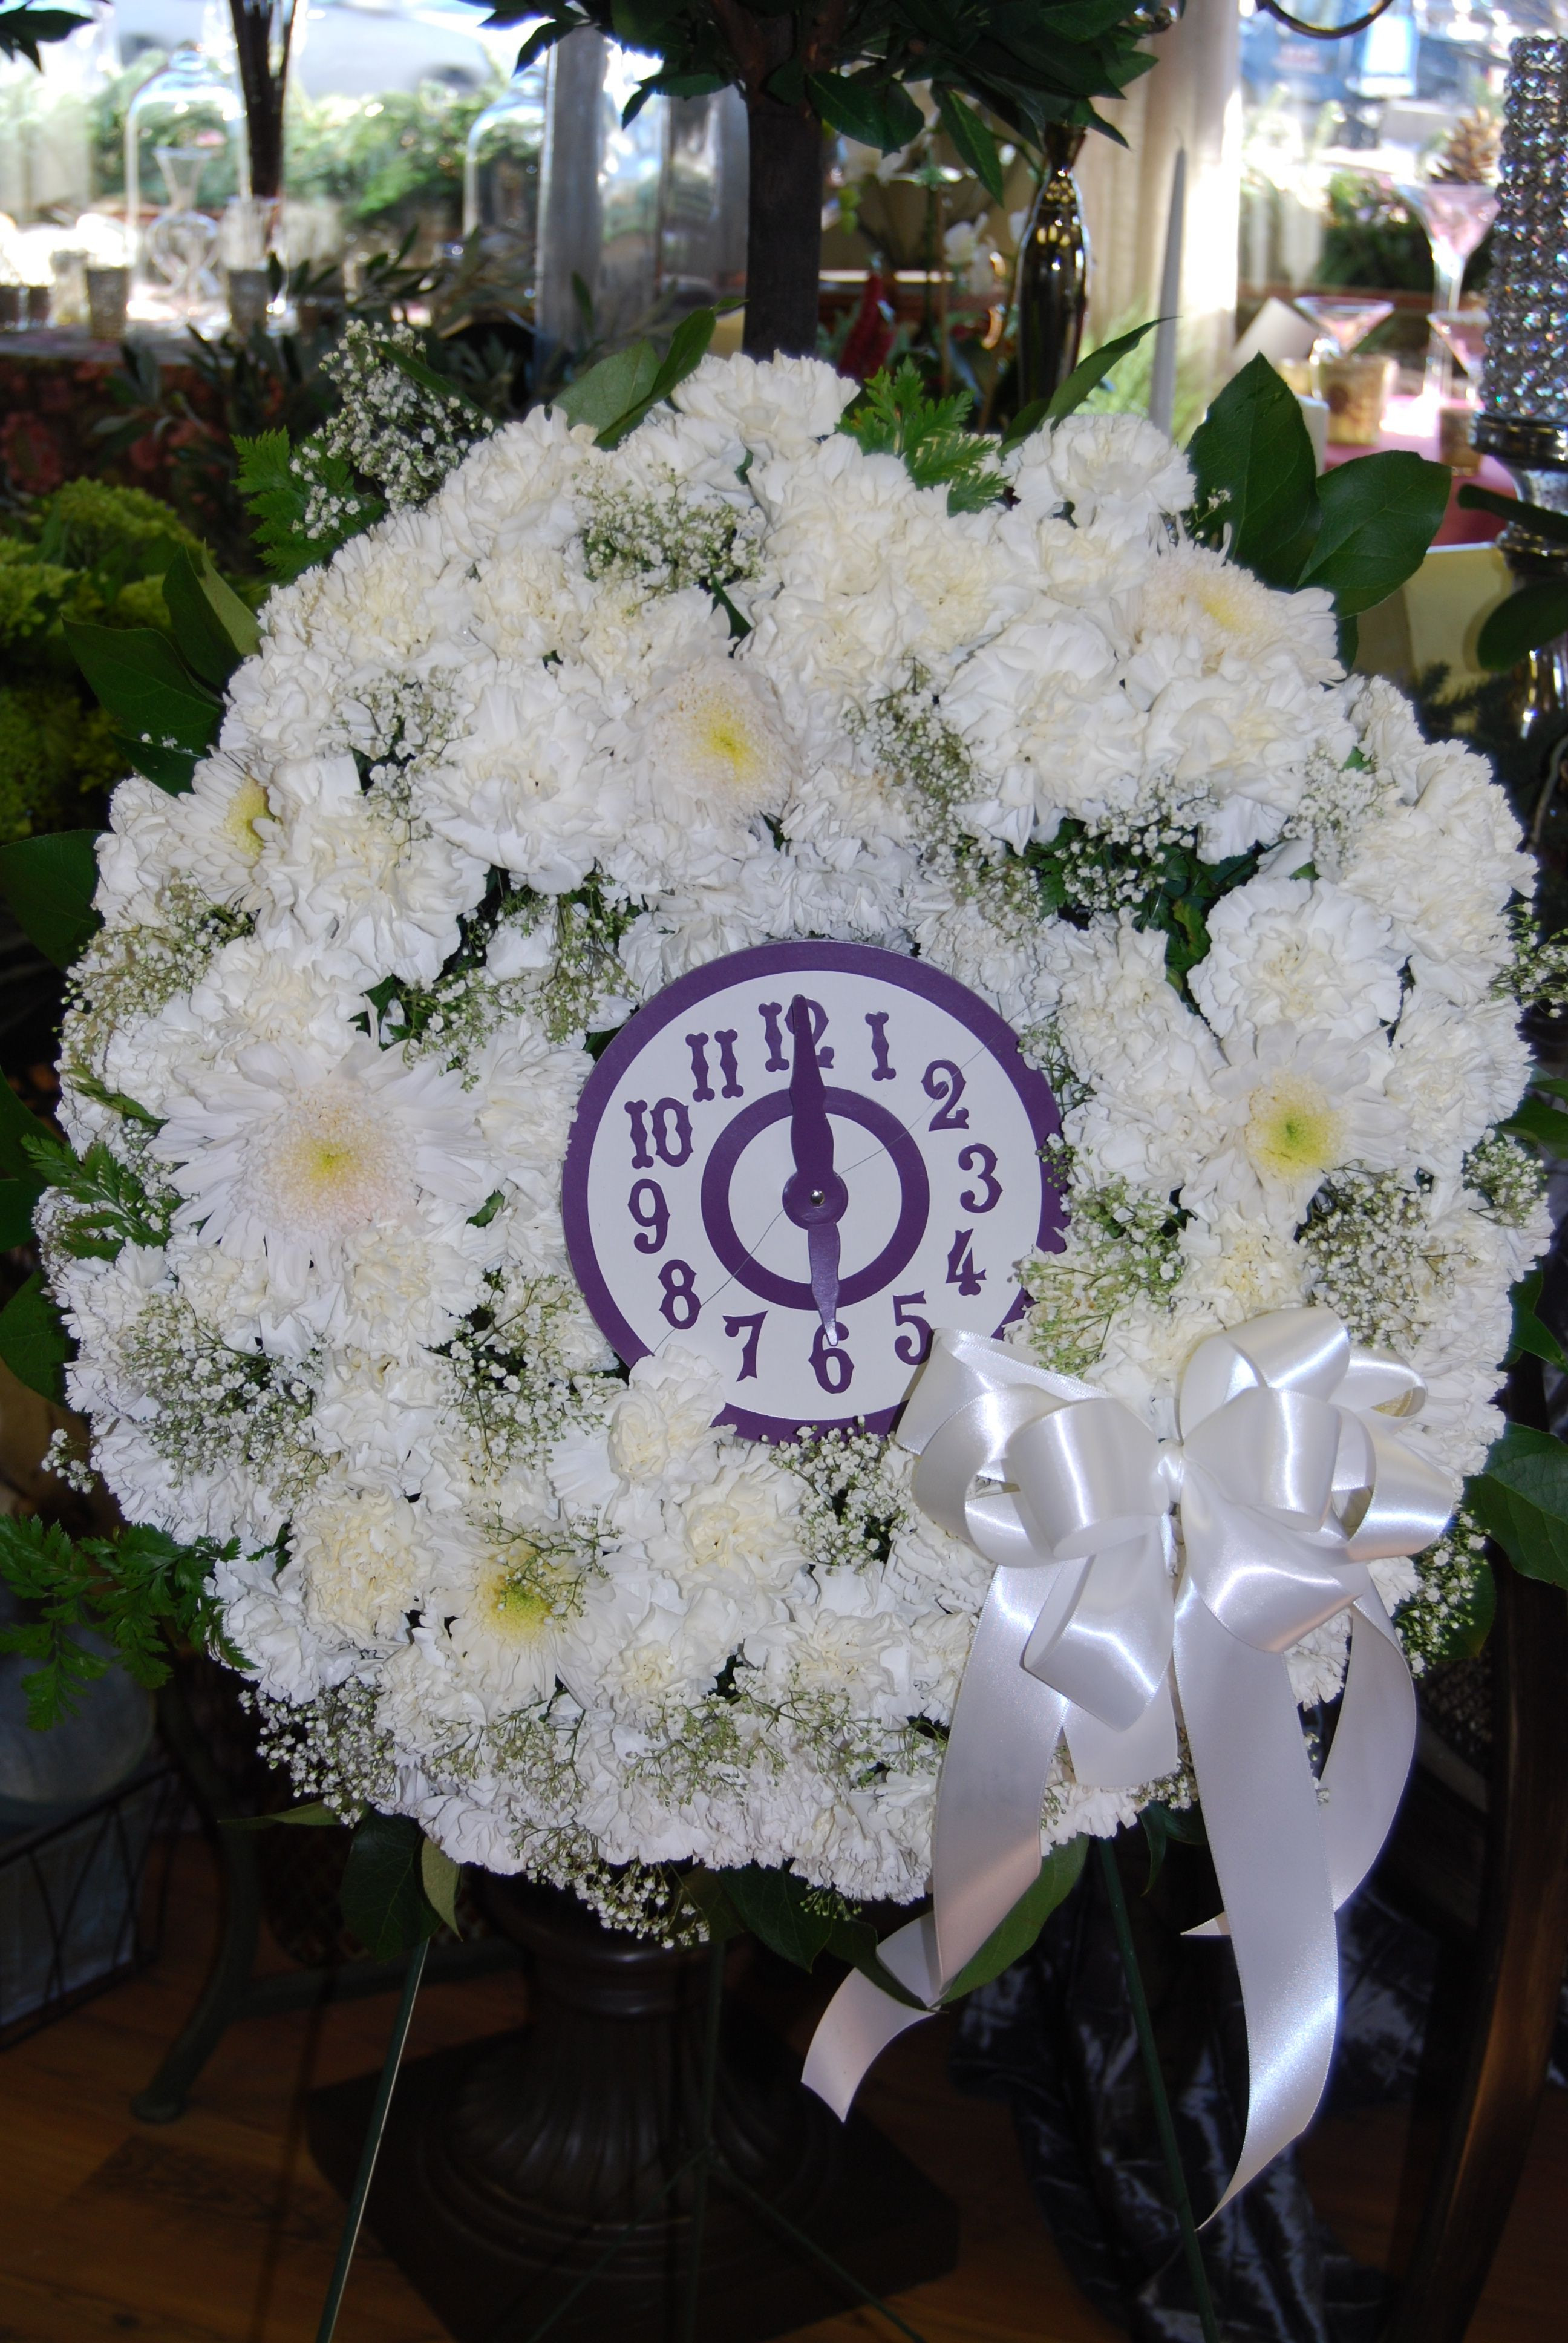 17 Ideal Ftd Cross Vase 2022 free download ftd cross vase of gypsy funeral time of death clock flower arrangement sympathy within gypsy funeral time of death clock flower arrangement gypsy clock death sympathy flowers